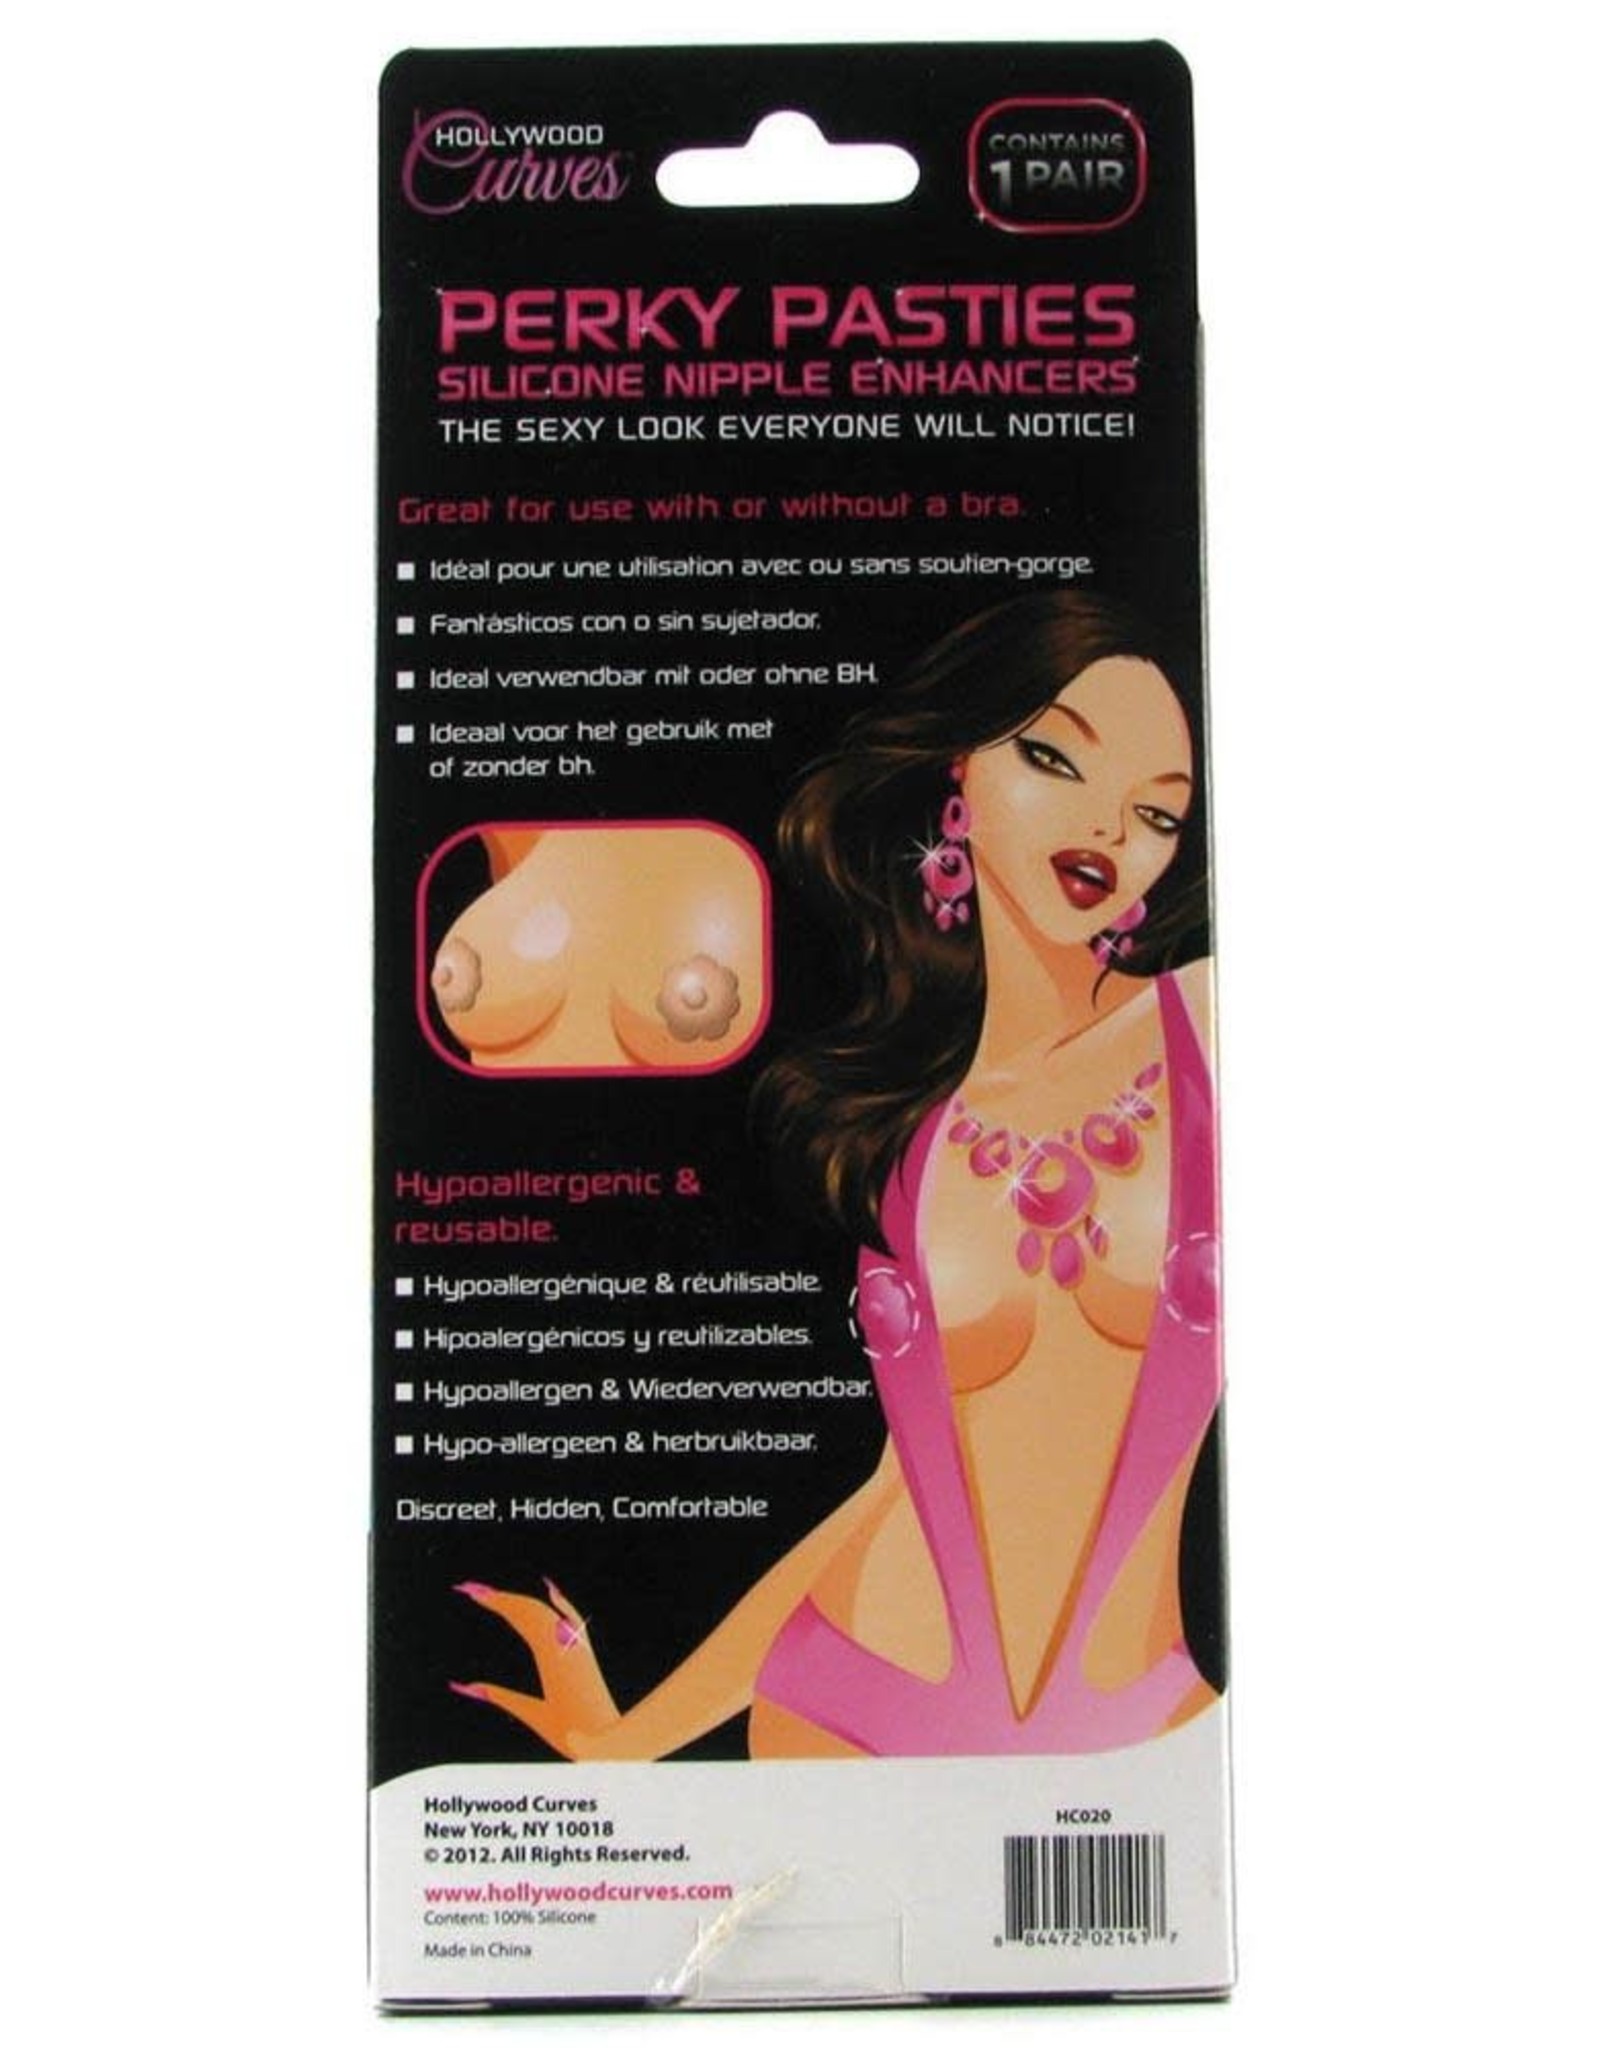 XGEN Hollywood Curves Perky Pasties Silicone Nipple Enhancers